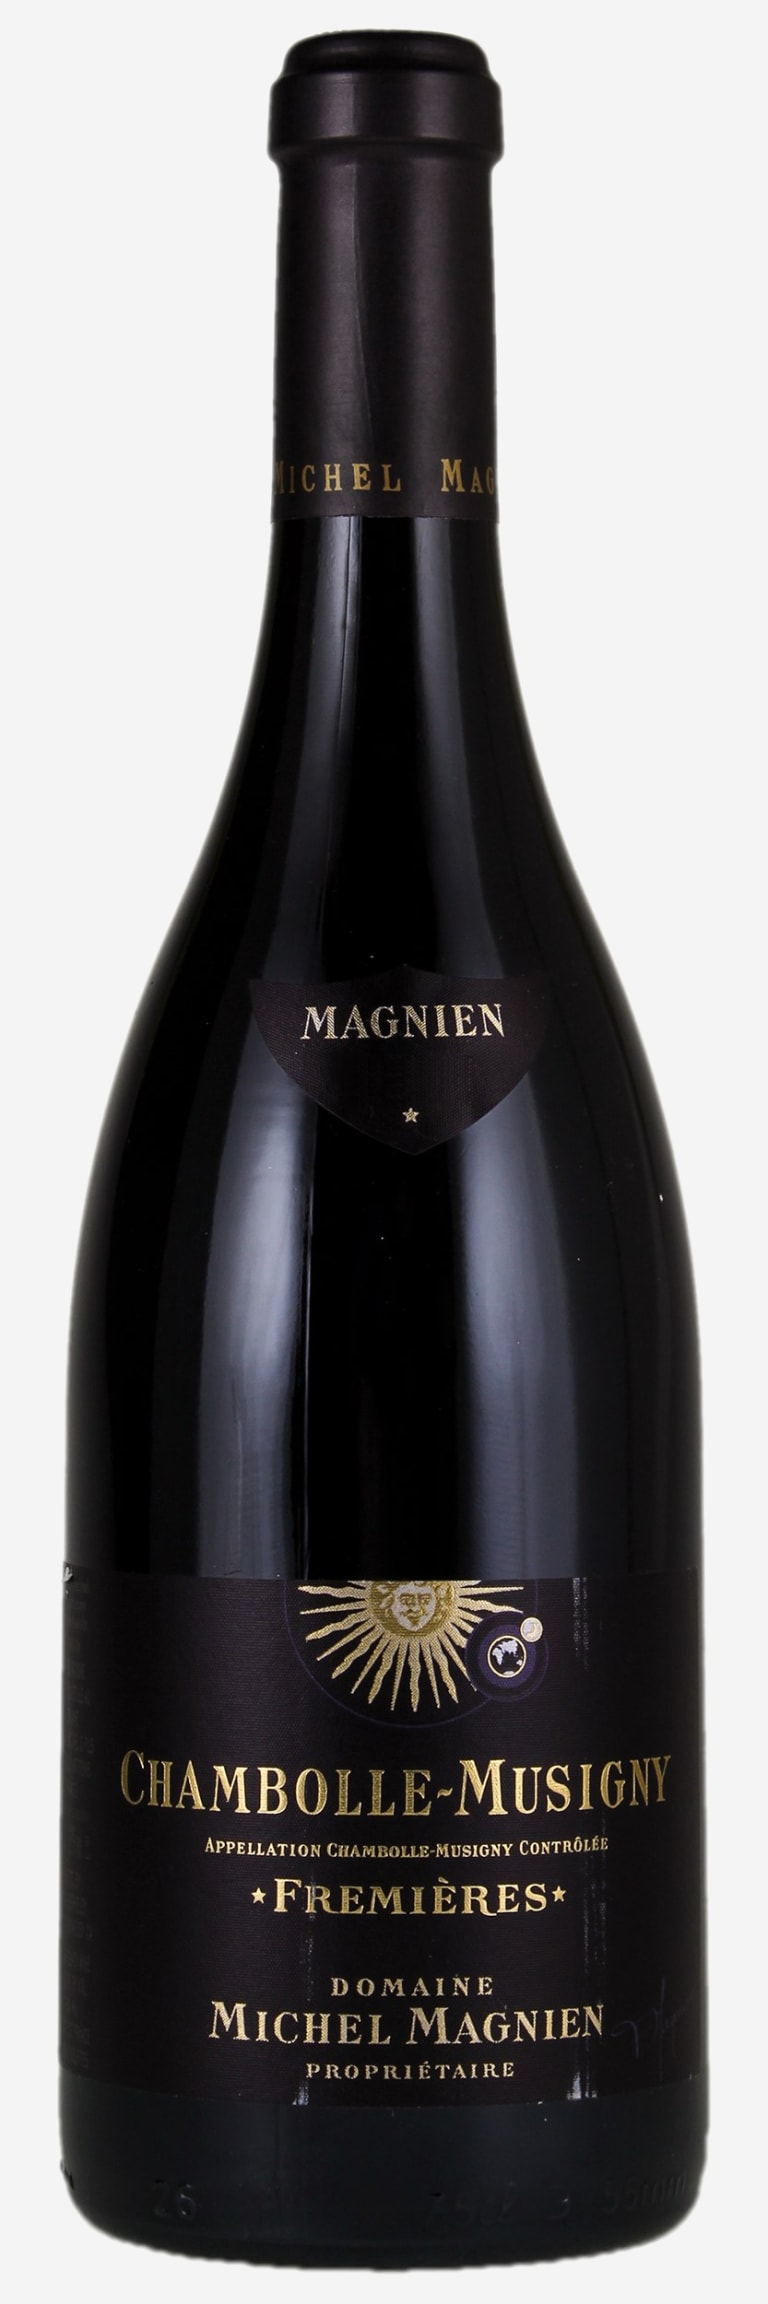 Domaine Michel Magnien Chambolle-Musigny Fremieres 2017